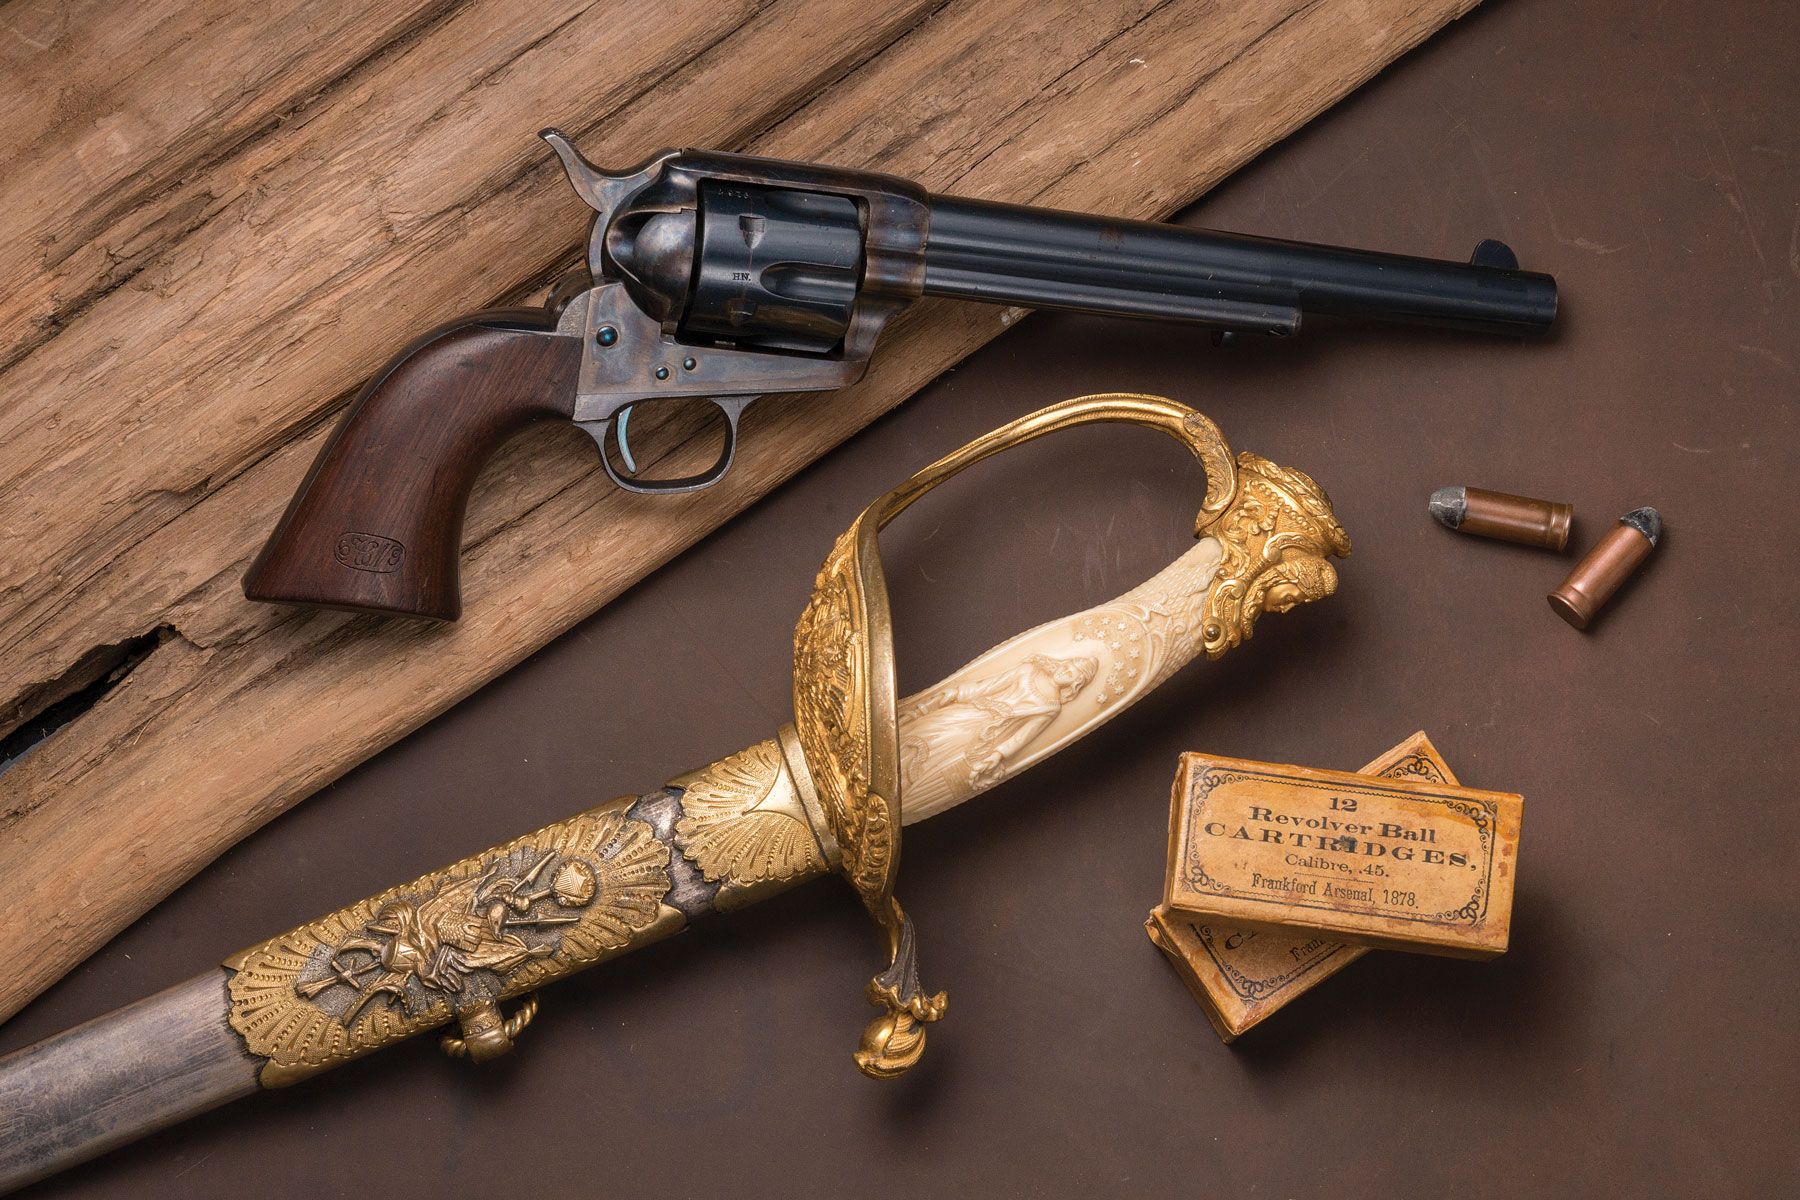 $20 Million at RIAC is Largest Firearms Auction Ever